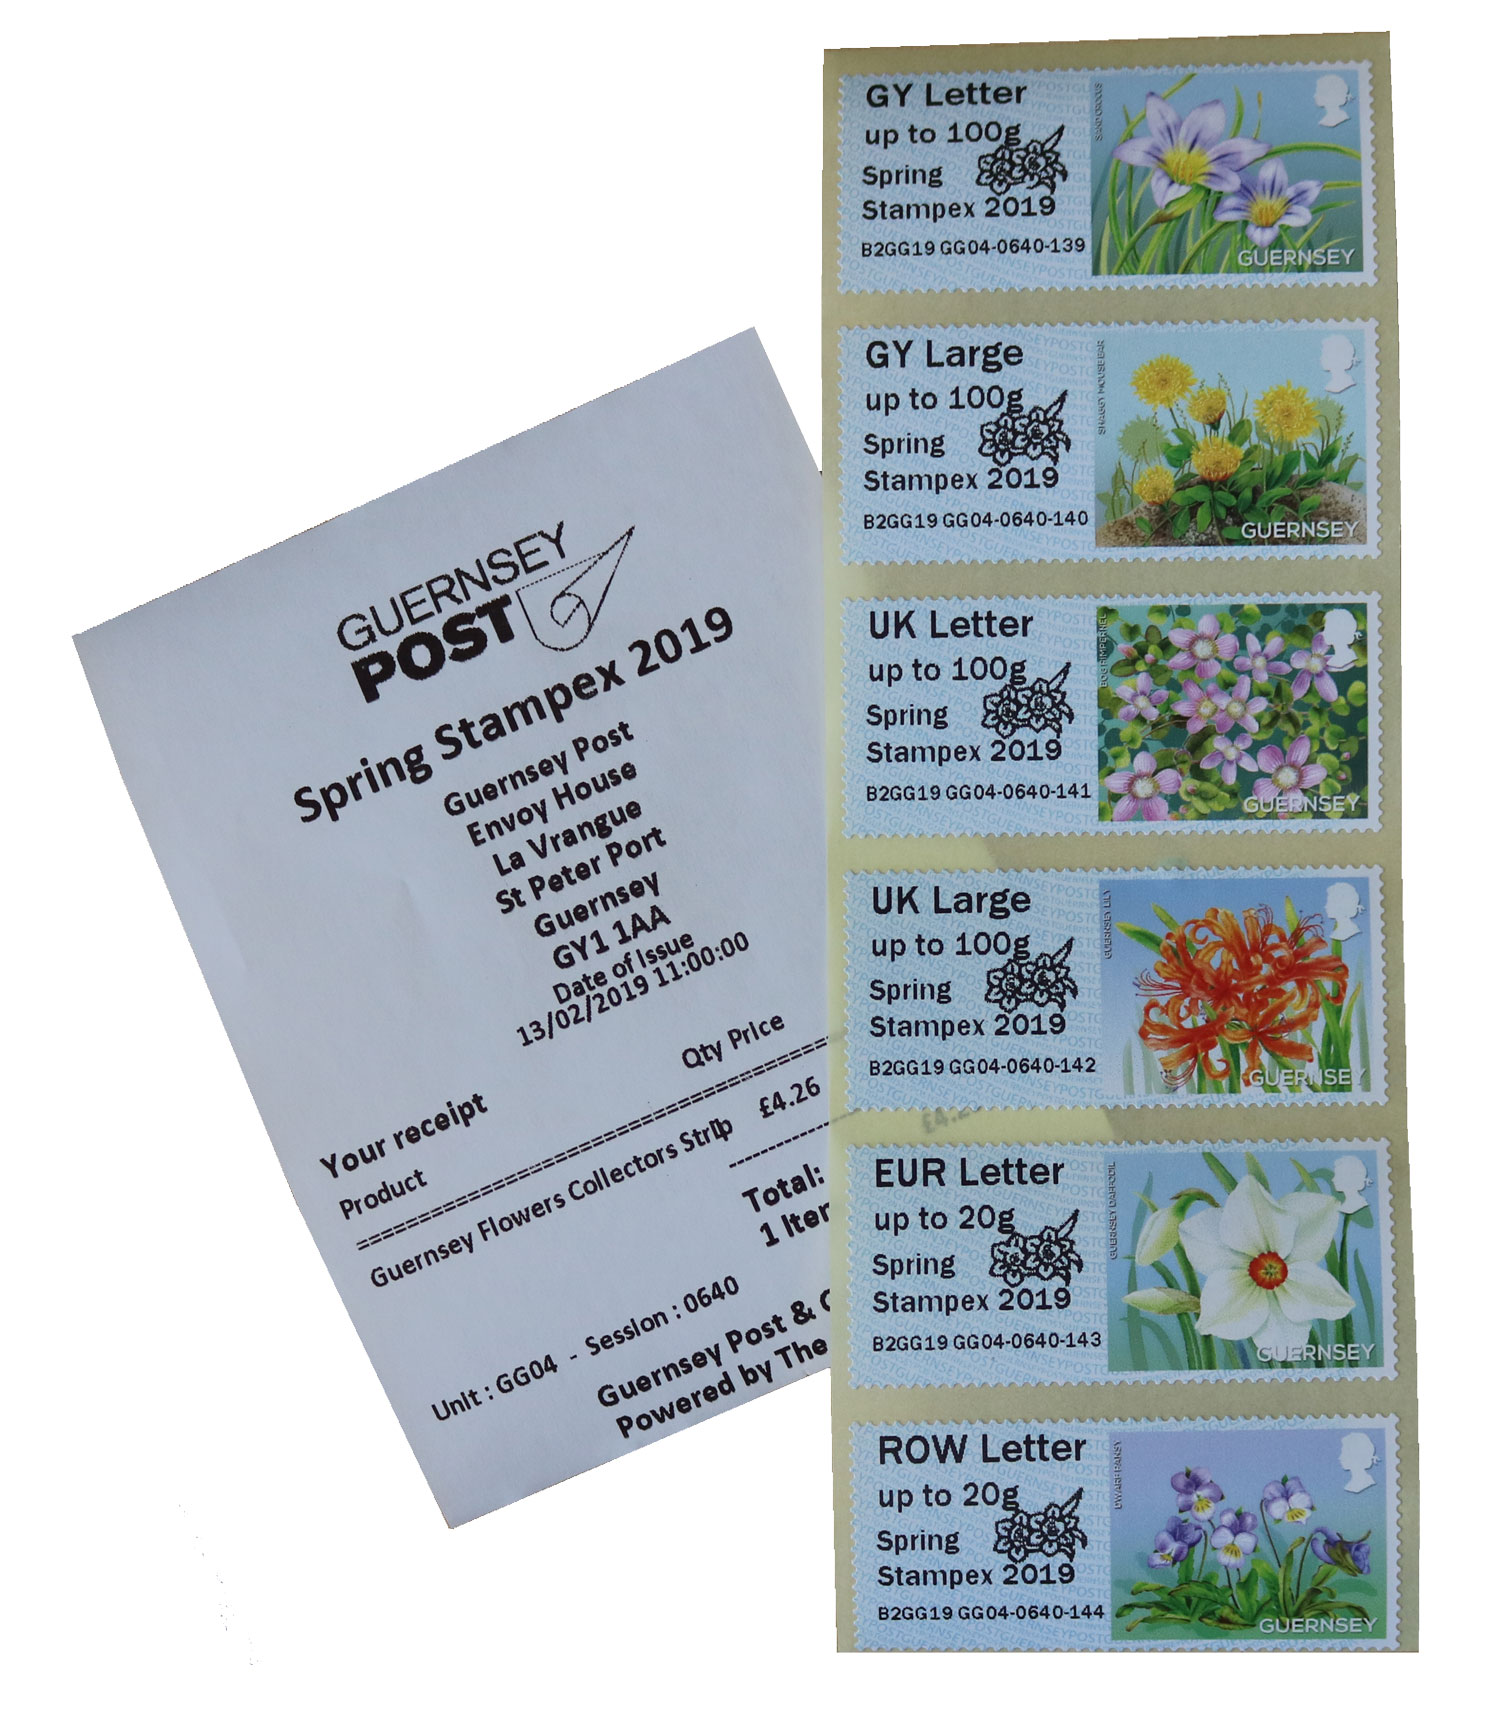 Spring Stampex 2019 Bailiwick Flowers (GG04)